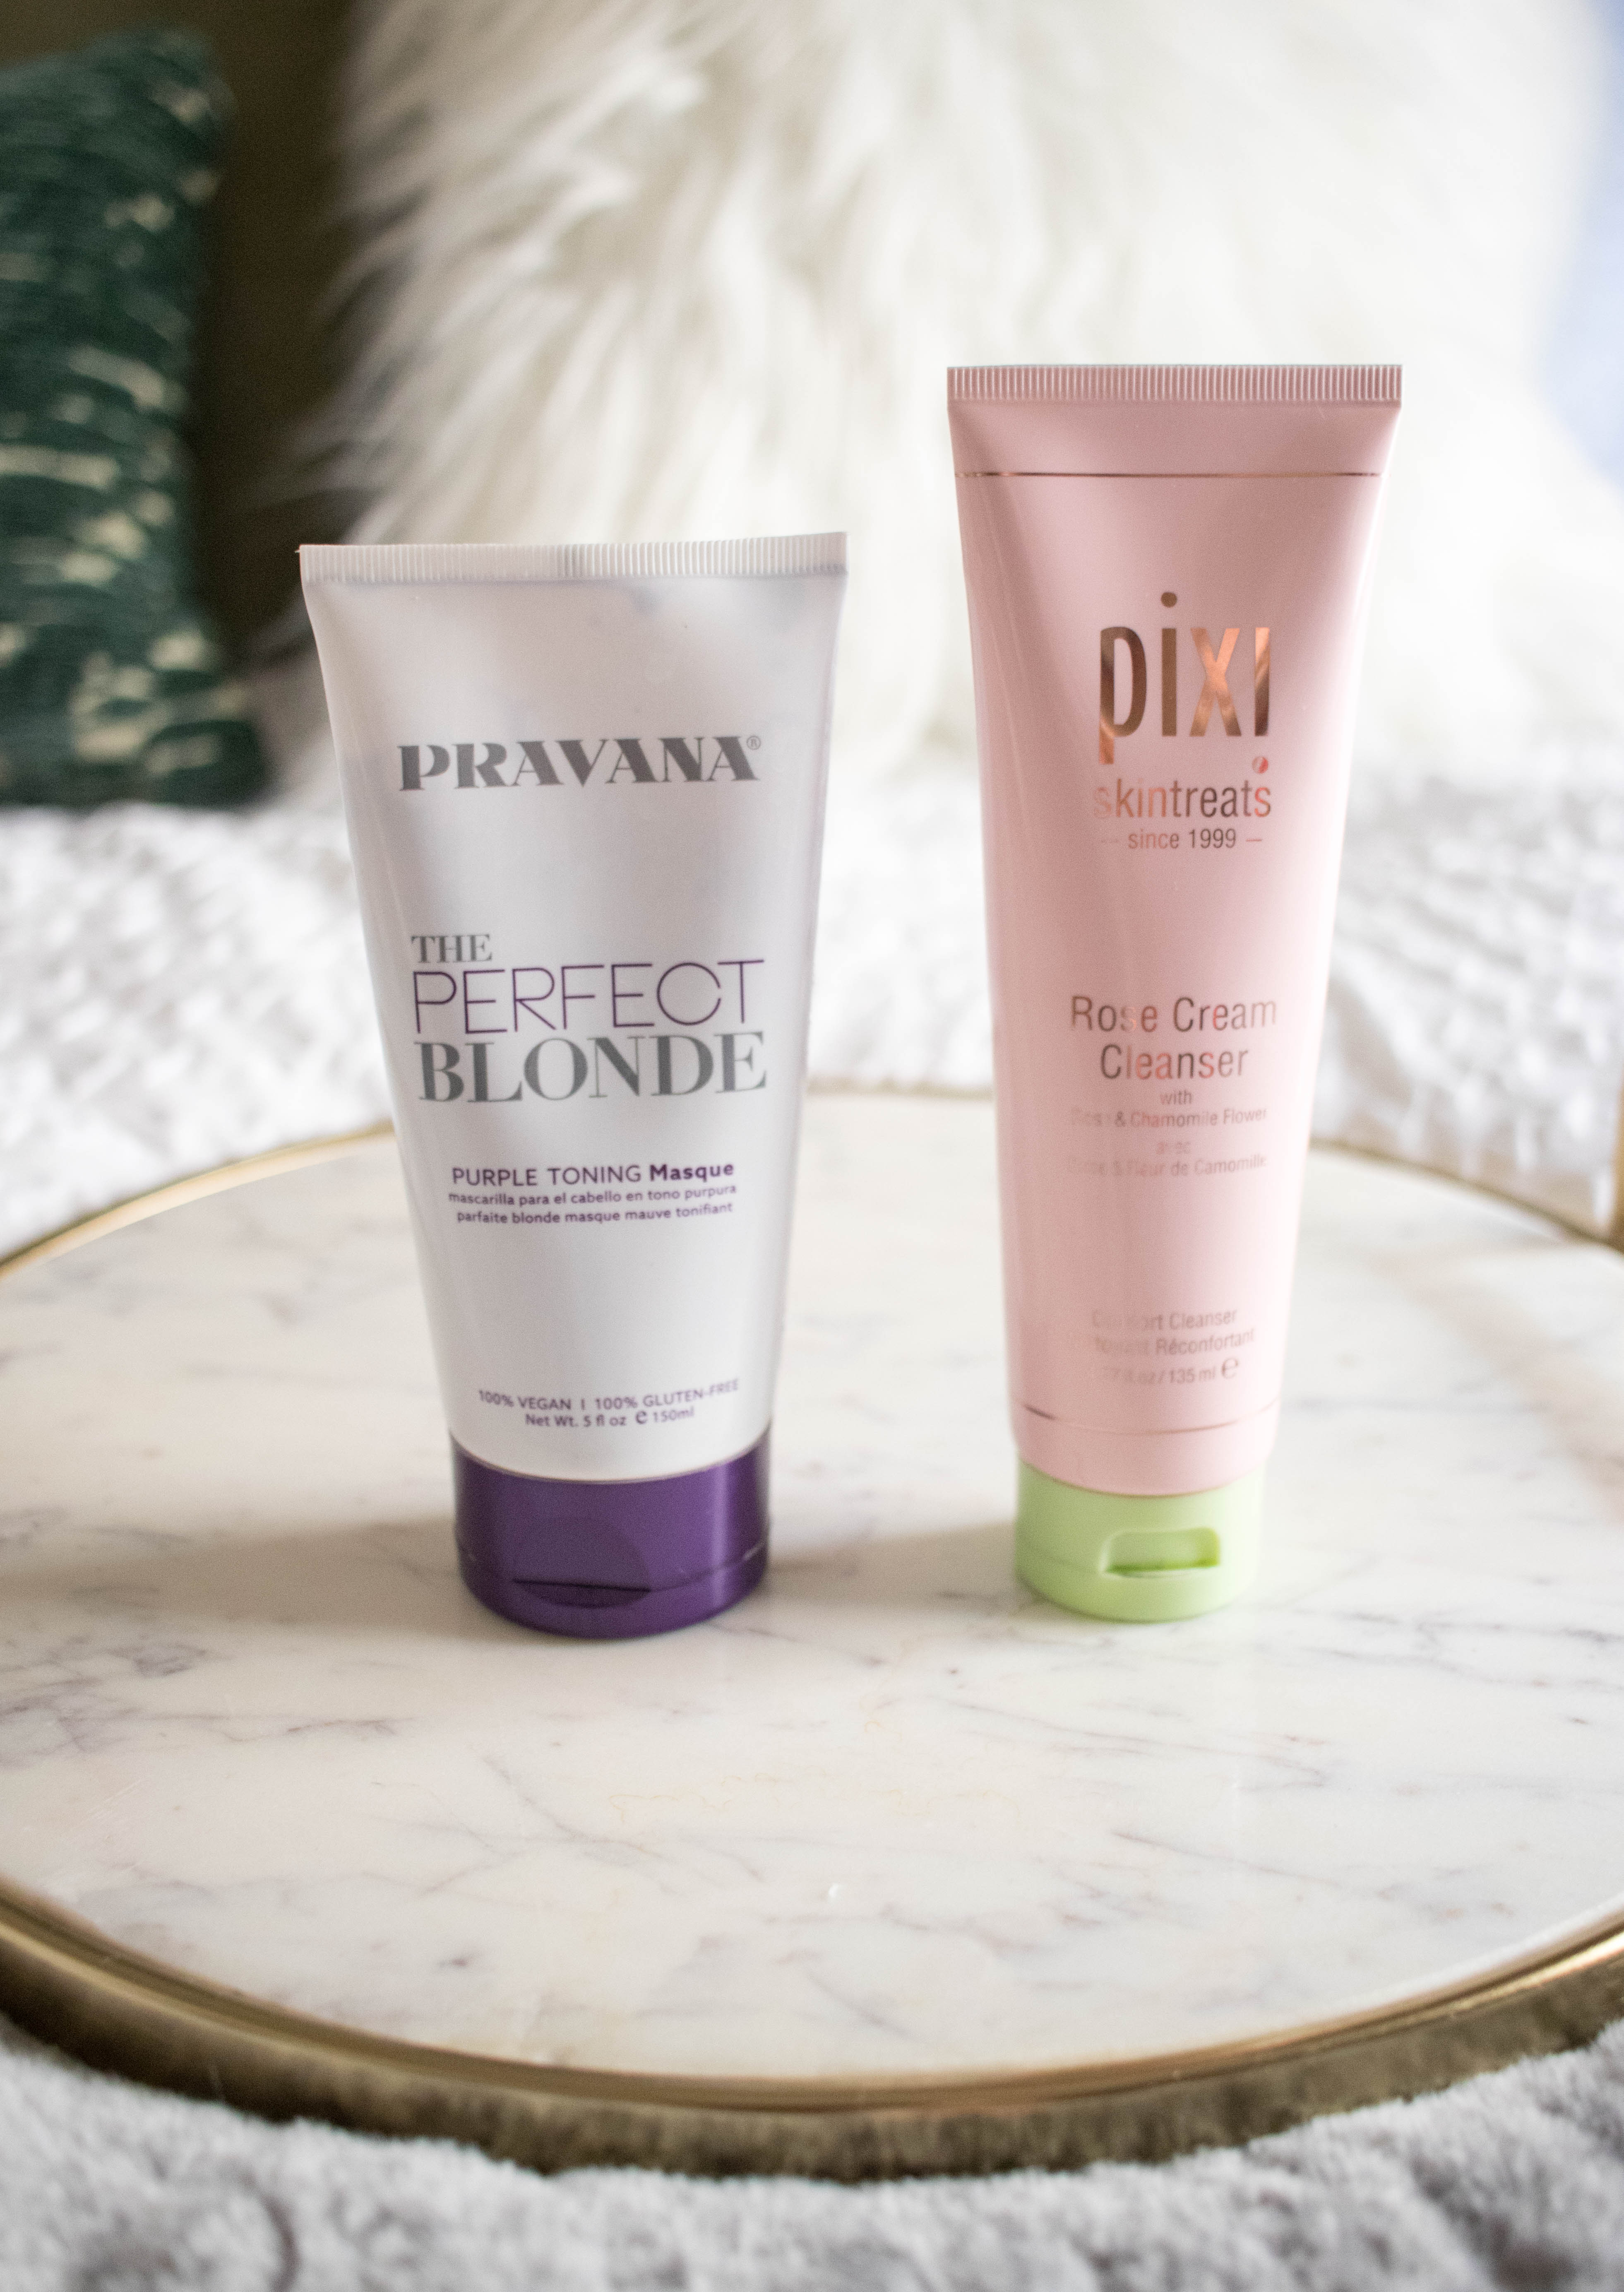 pravana the perfect blonde masque review #haircare #blondehair #pixibeauty